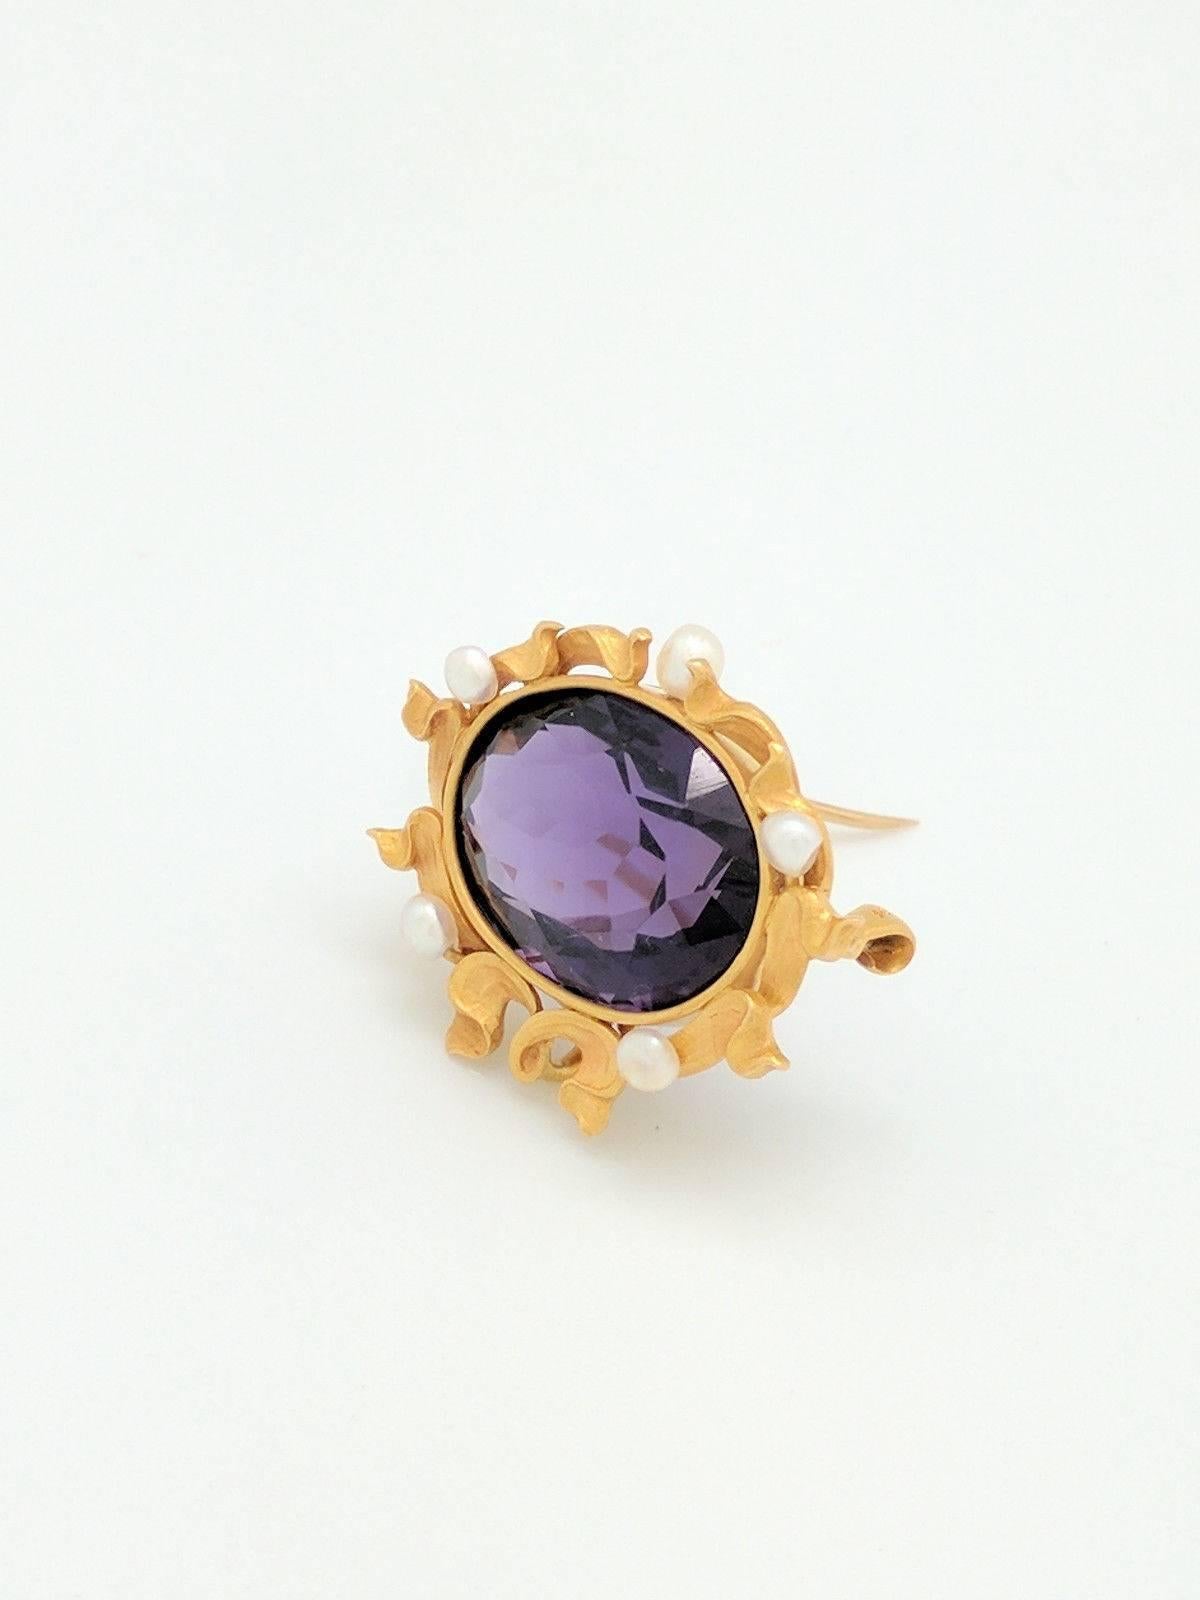 14 Karat Yellow Gold Amethyst and Seed Pearl Brooch Pin For Sale 2